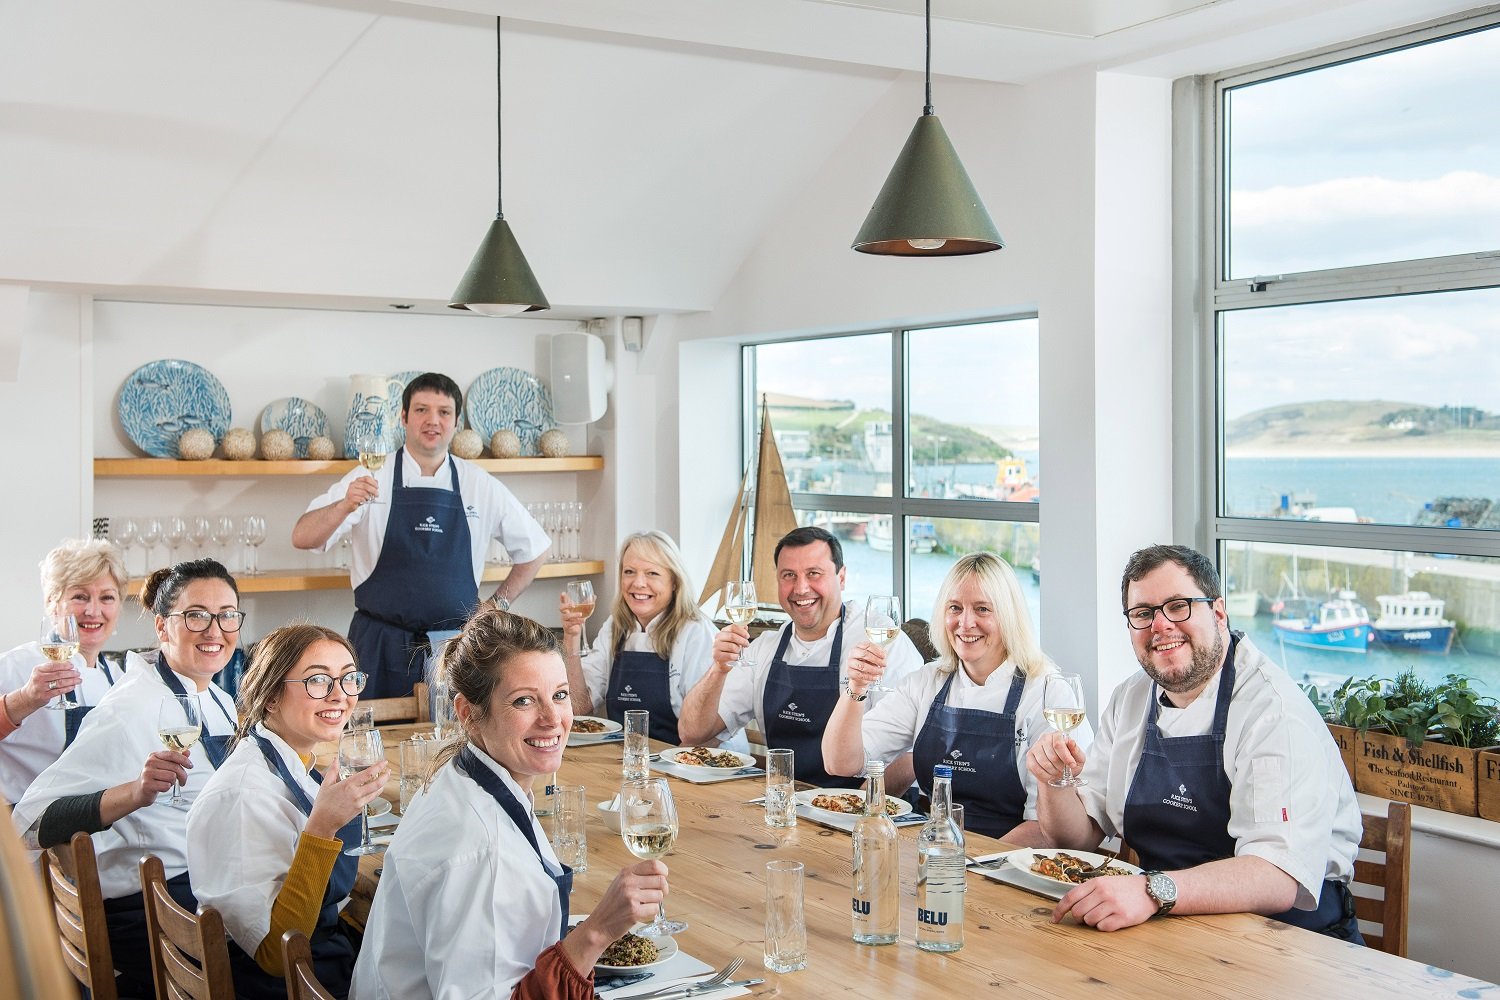 Students celebrate with lunch at the cookery school